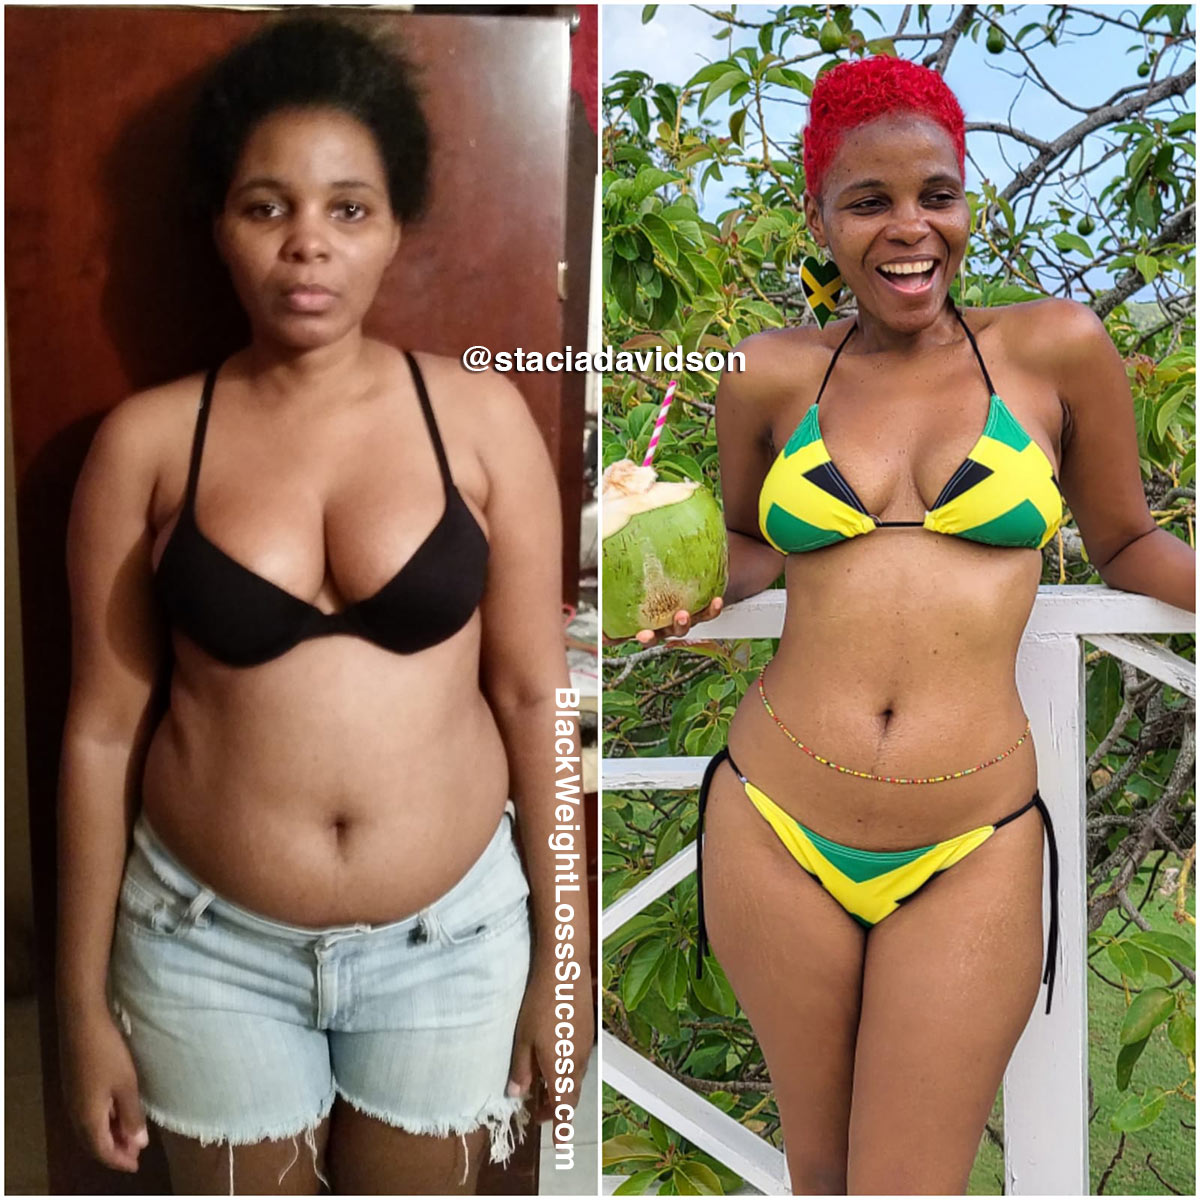 Stacia before and after weight loss